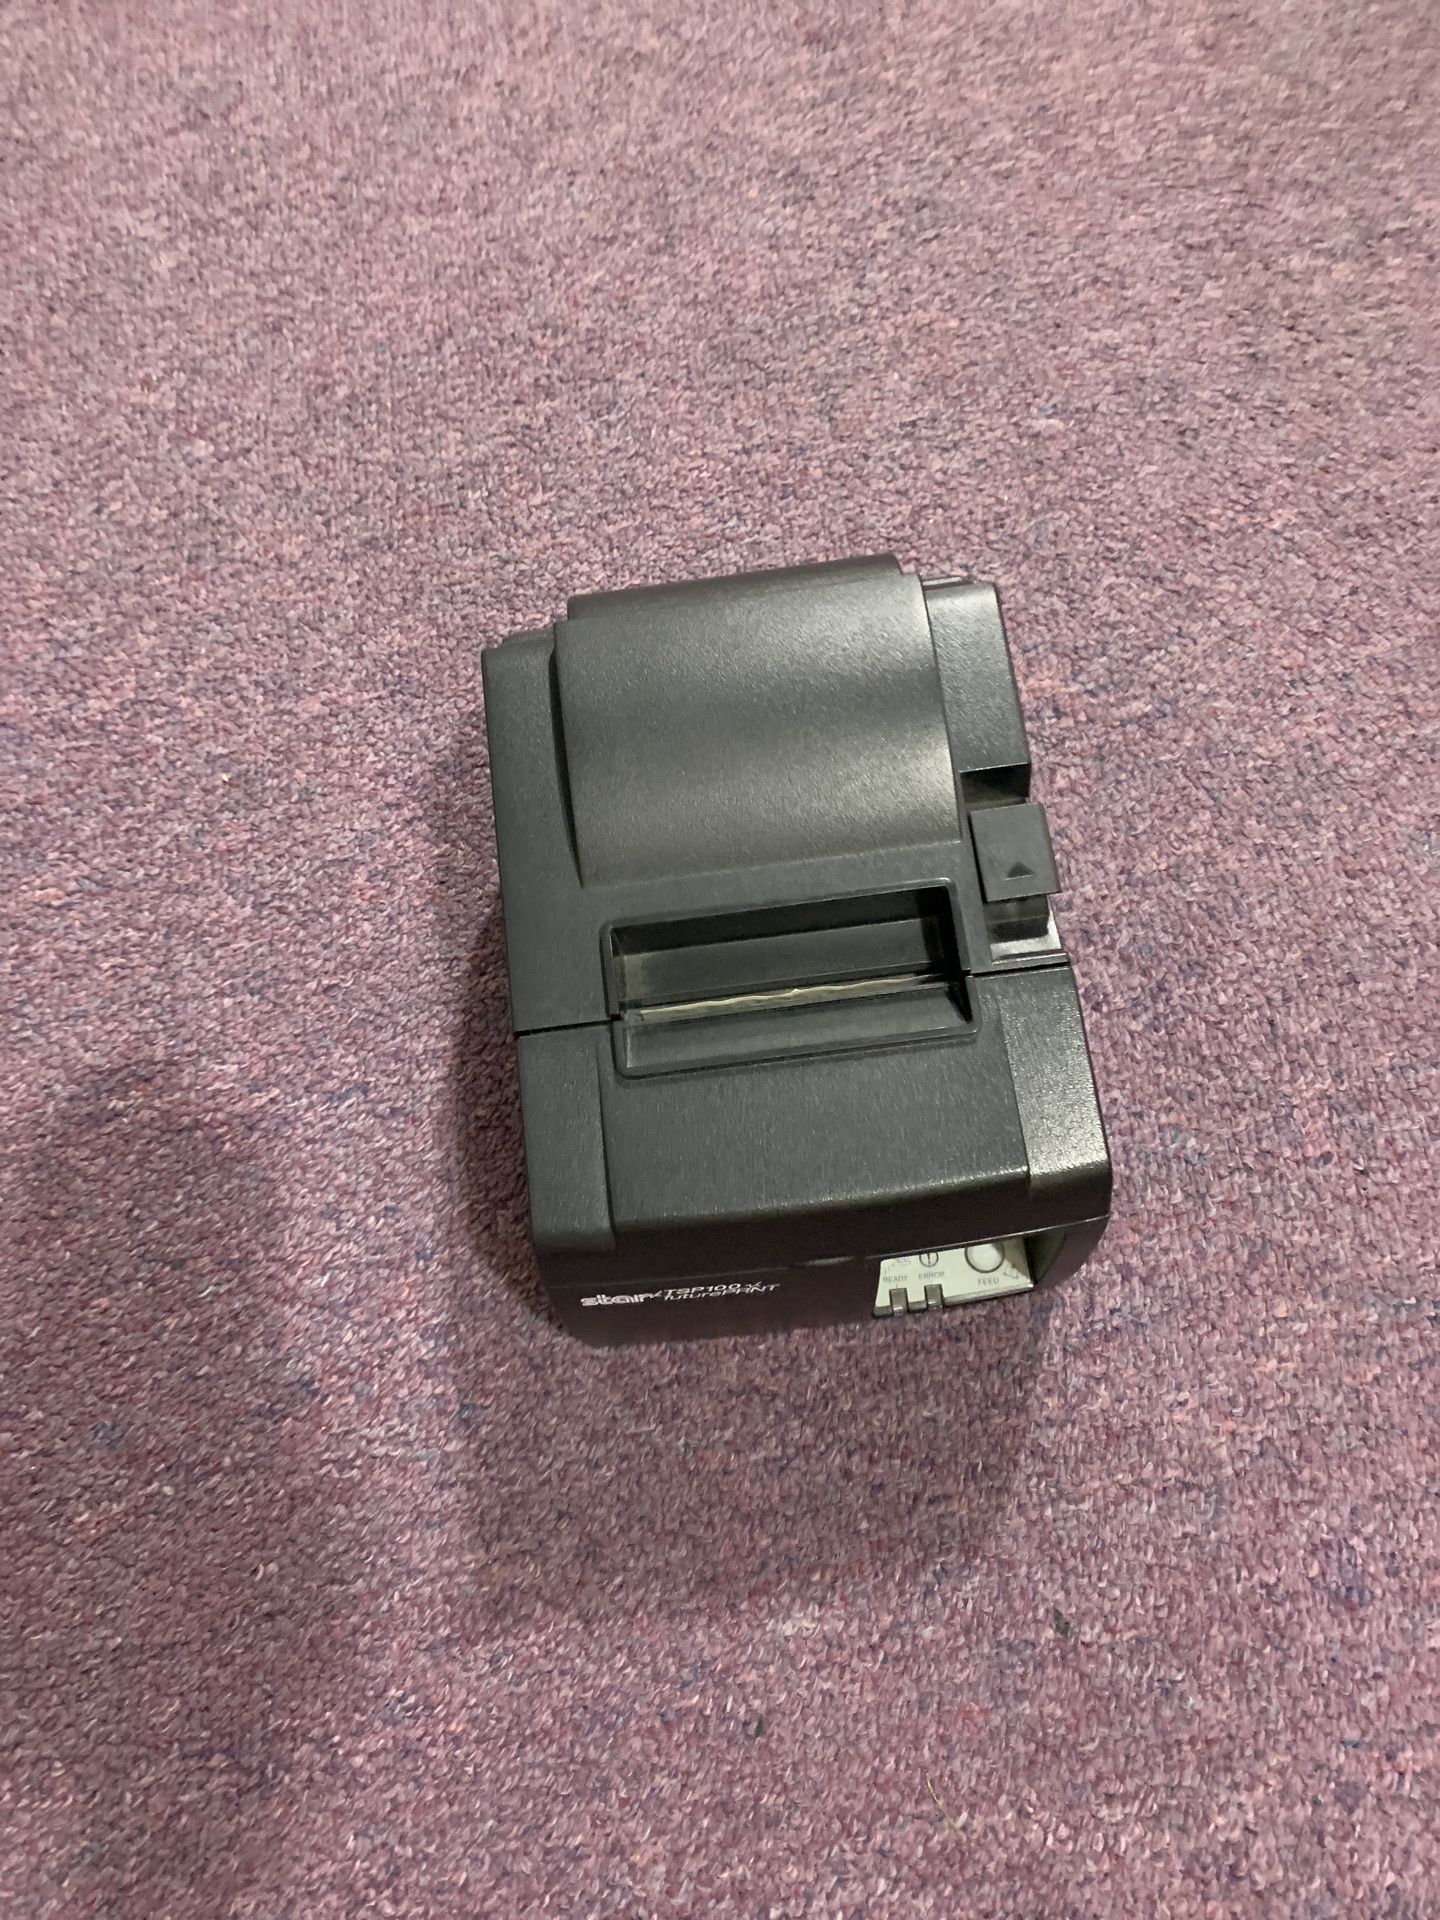 POS Receipt Printer and printer rolls included. Almost new.